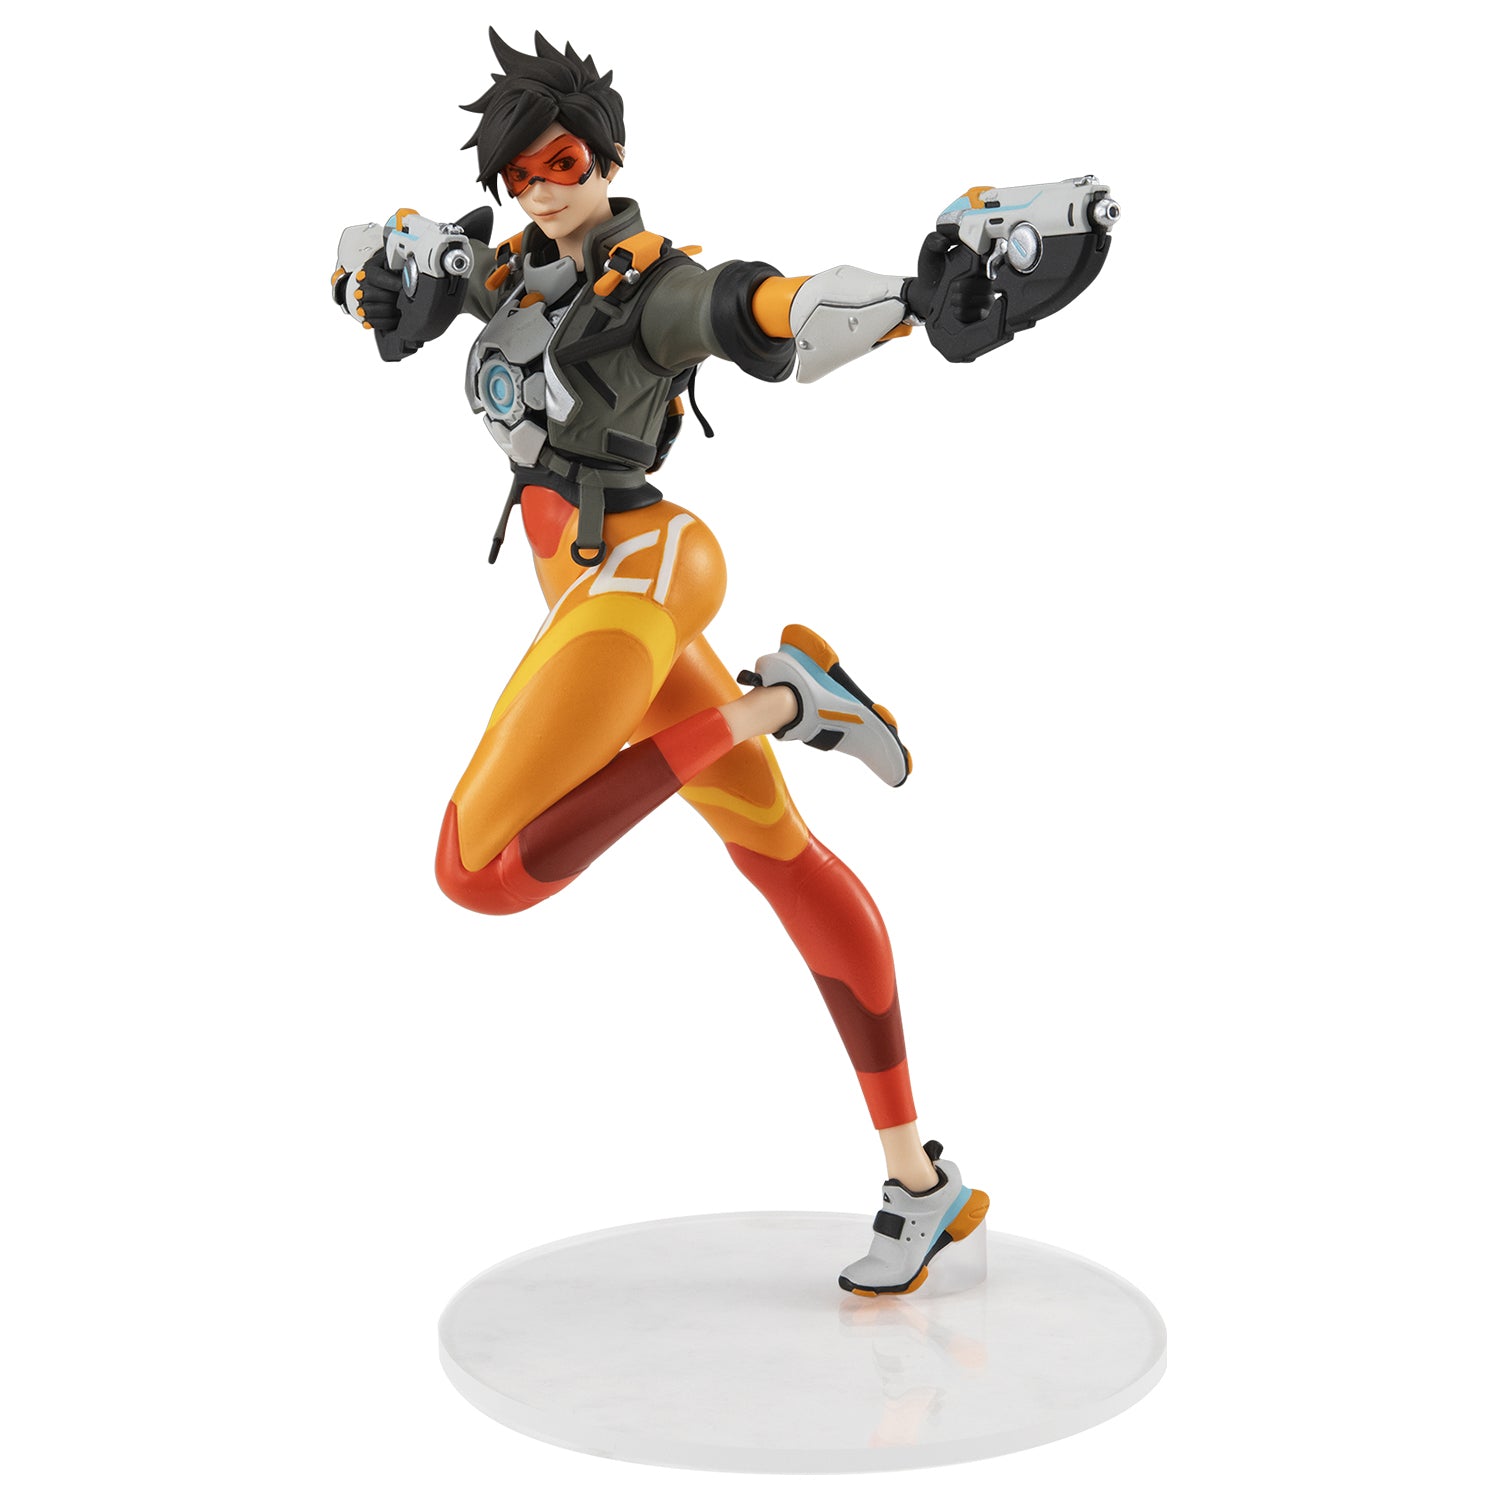 Overwatch 1 vs 2: Which Tracer Design is Better? 